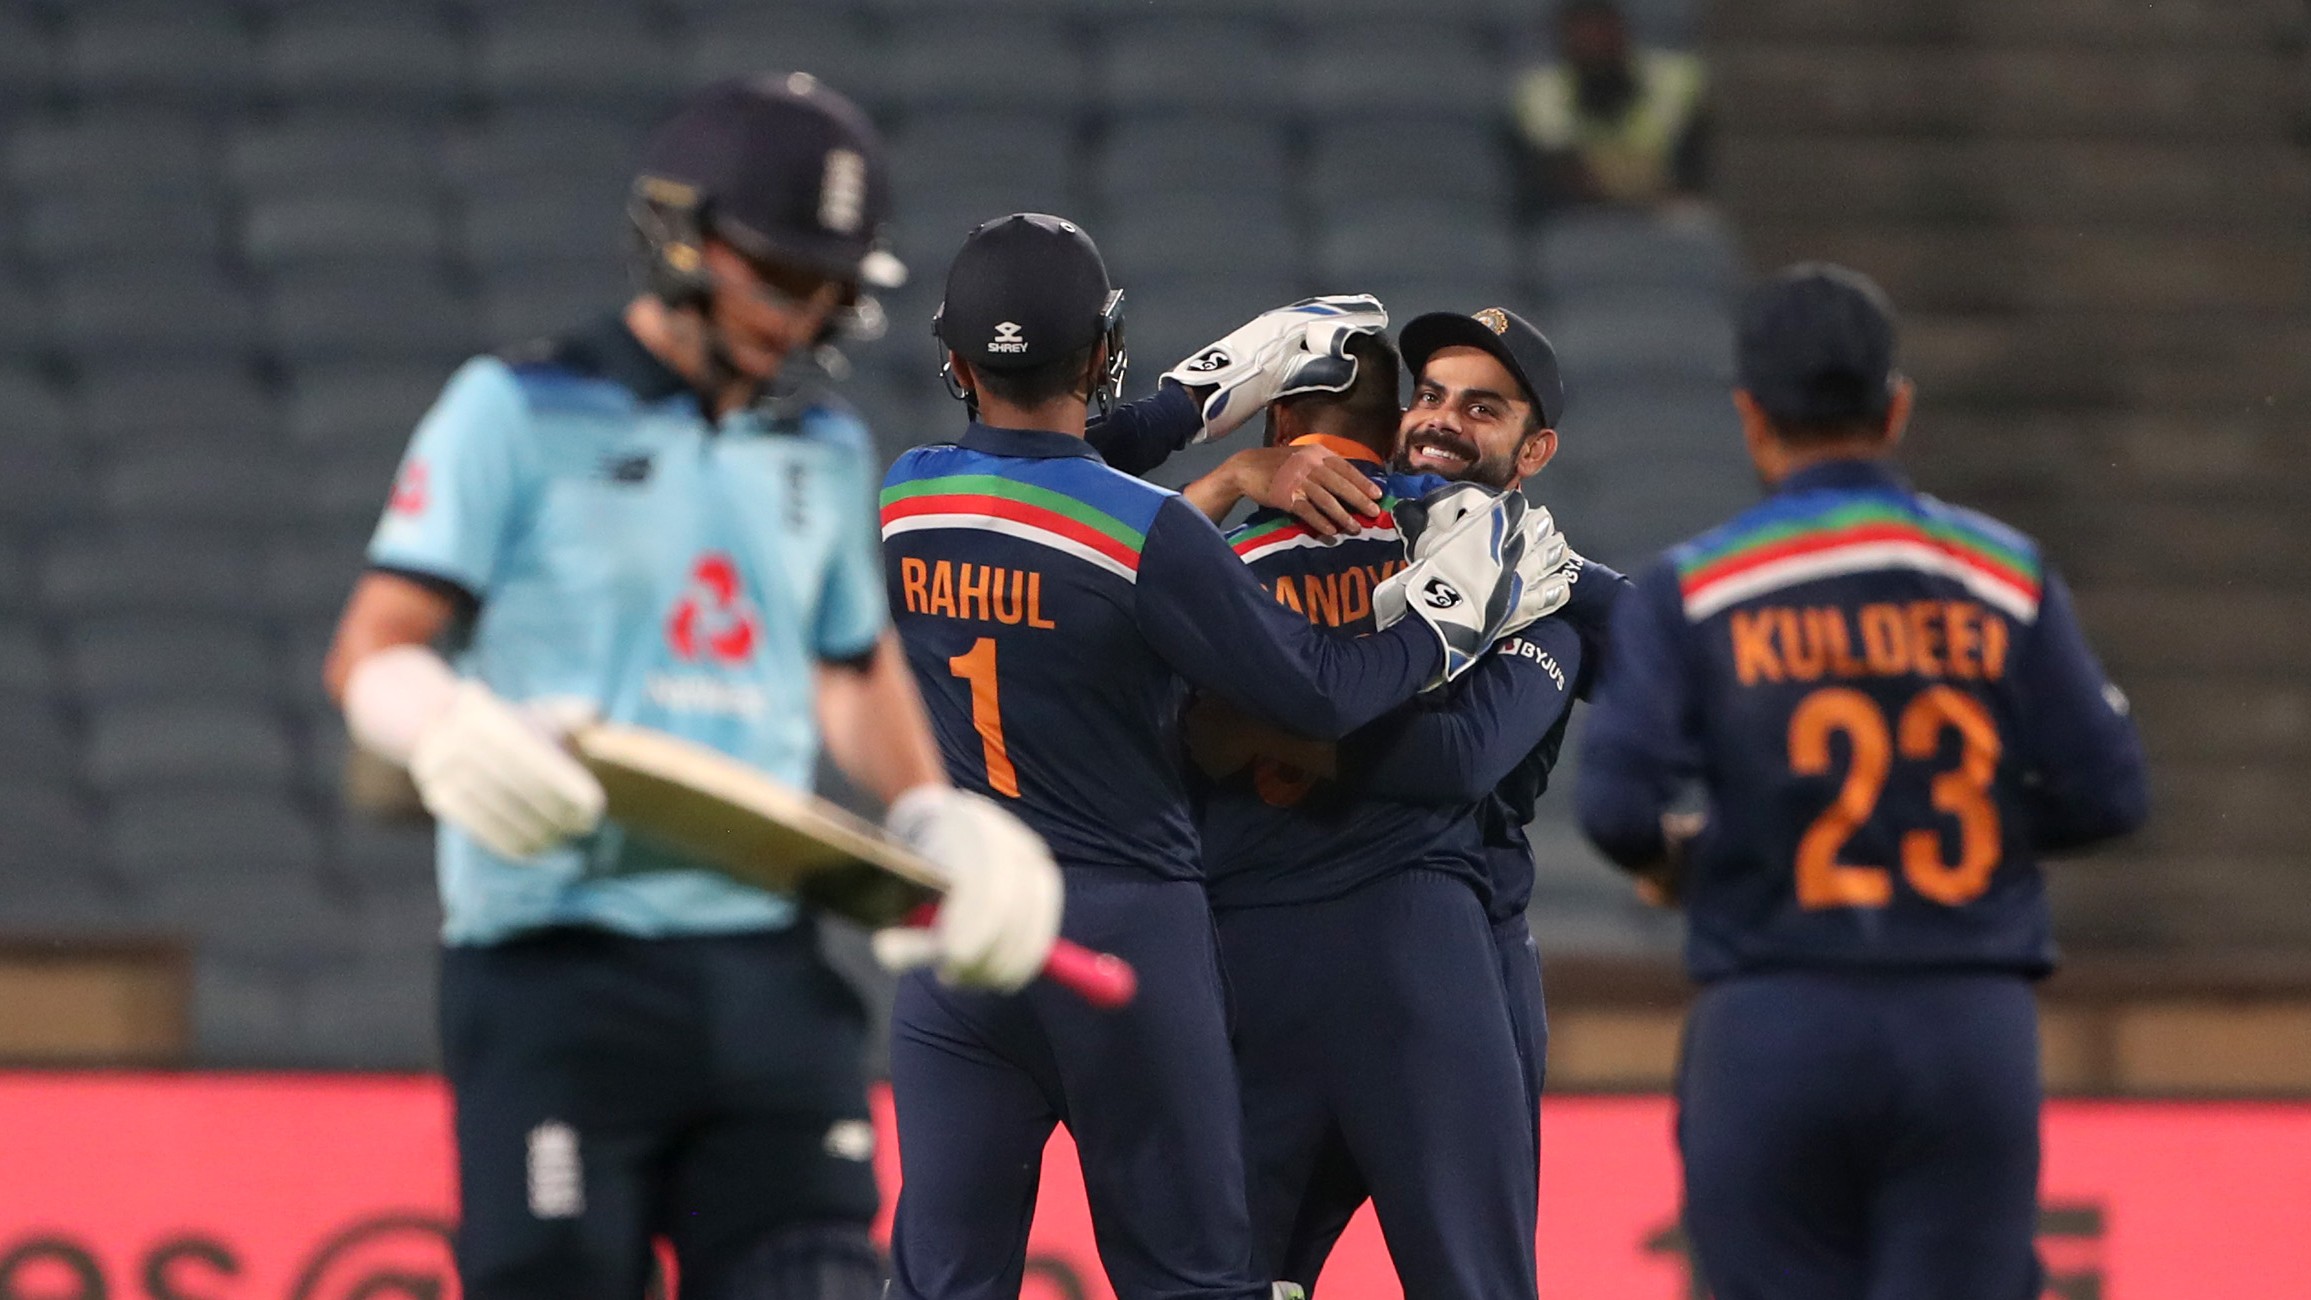 India vs England 2021, 2nd ODI: Match Preview And Prediction